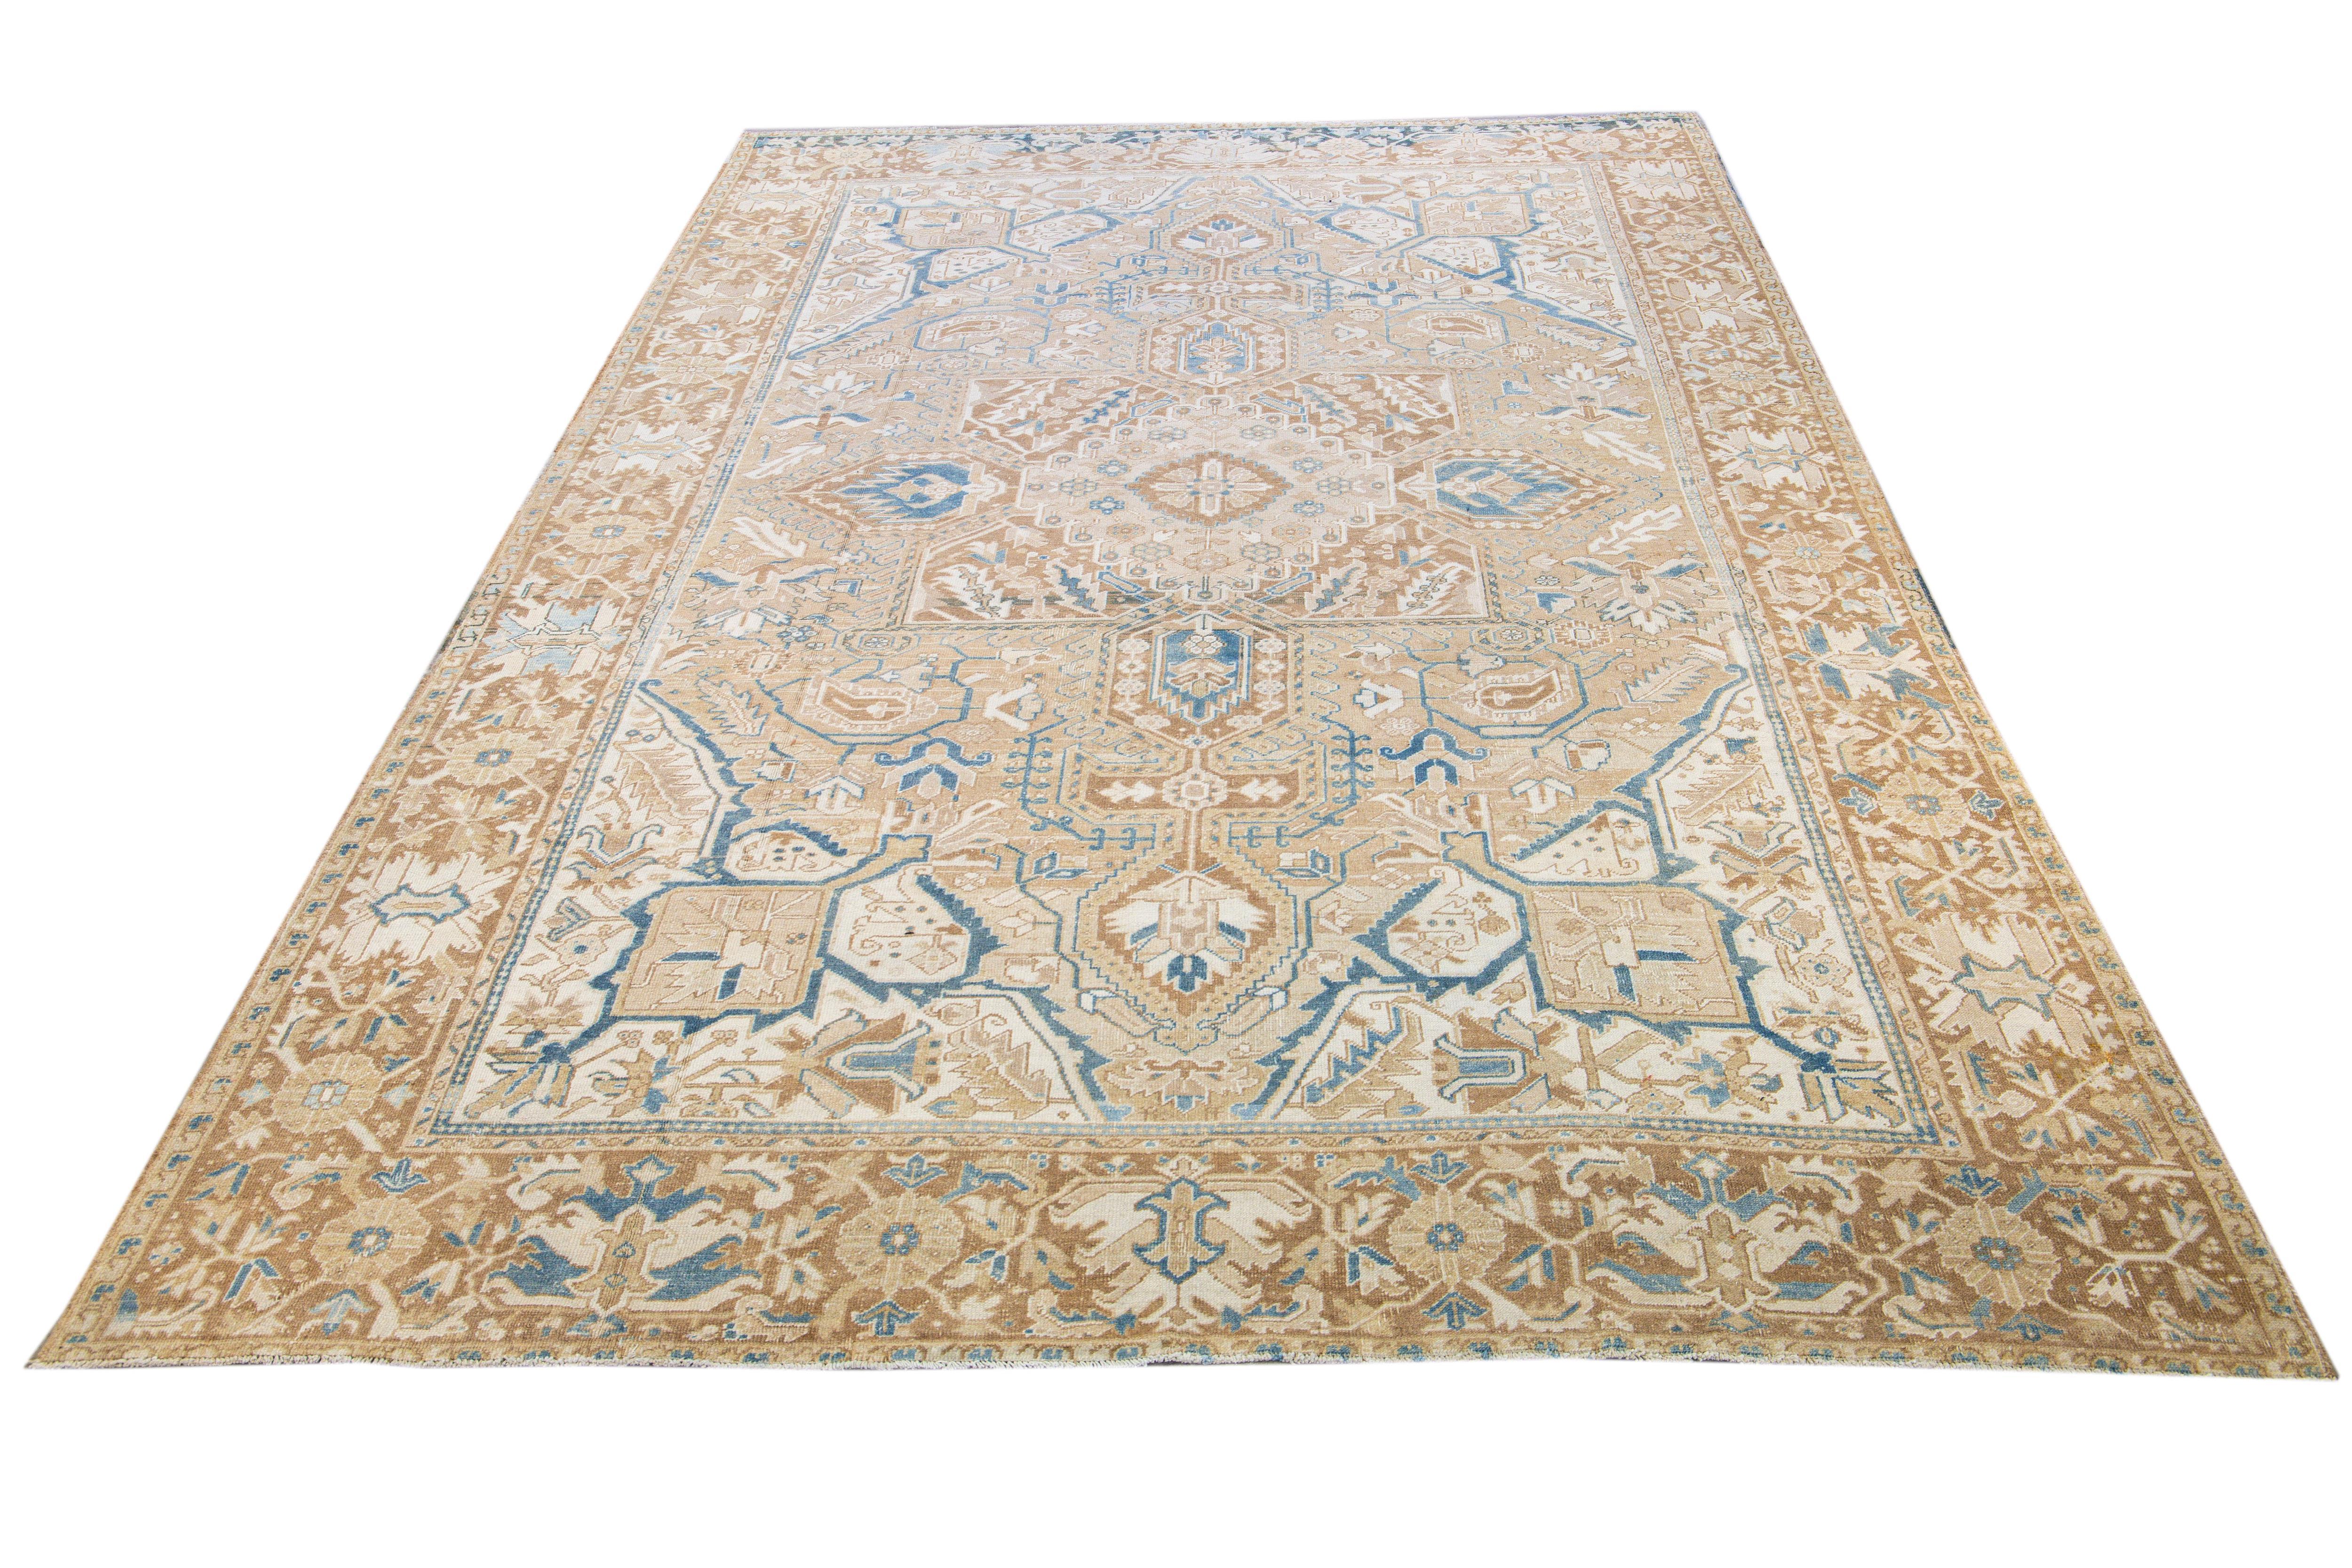 Beautiful antique Heriz hand-knotted wool rug with a tan field. This Persian rug has a blue and ivory accent in a gorgeous all-over layout geometric medallion floral motif.

This rug measures: 9'3